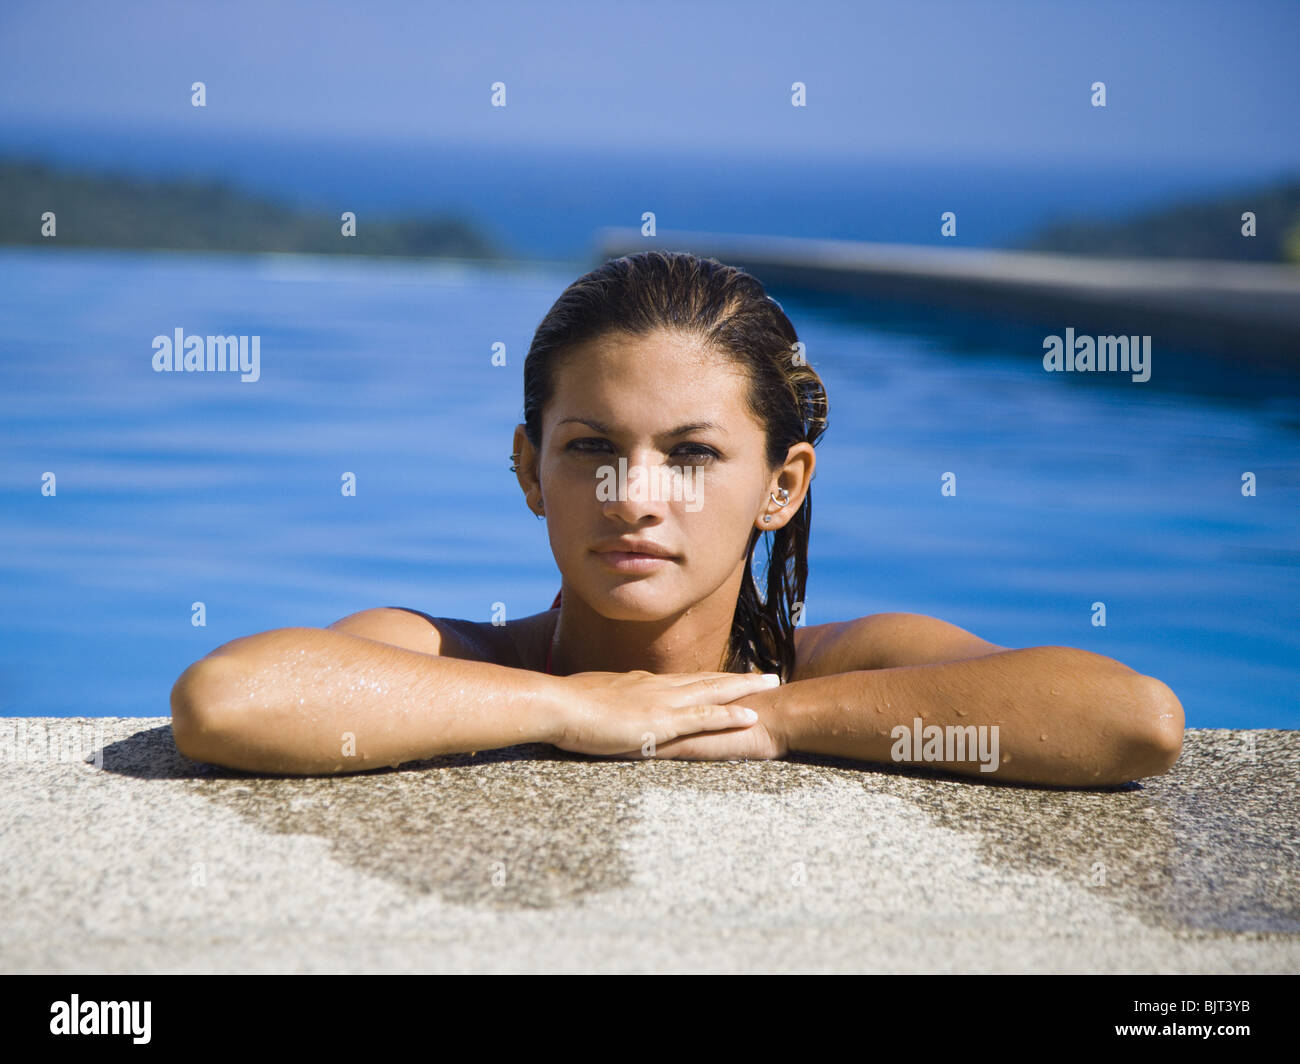 Woman resting on ledge of swimming pool Stock Photo